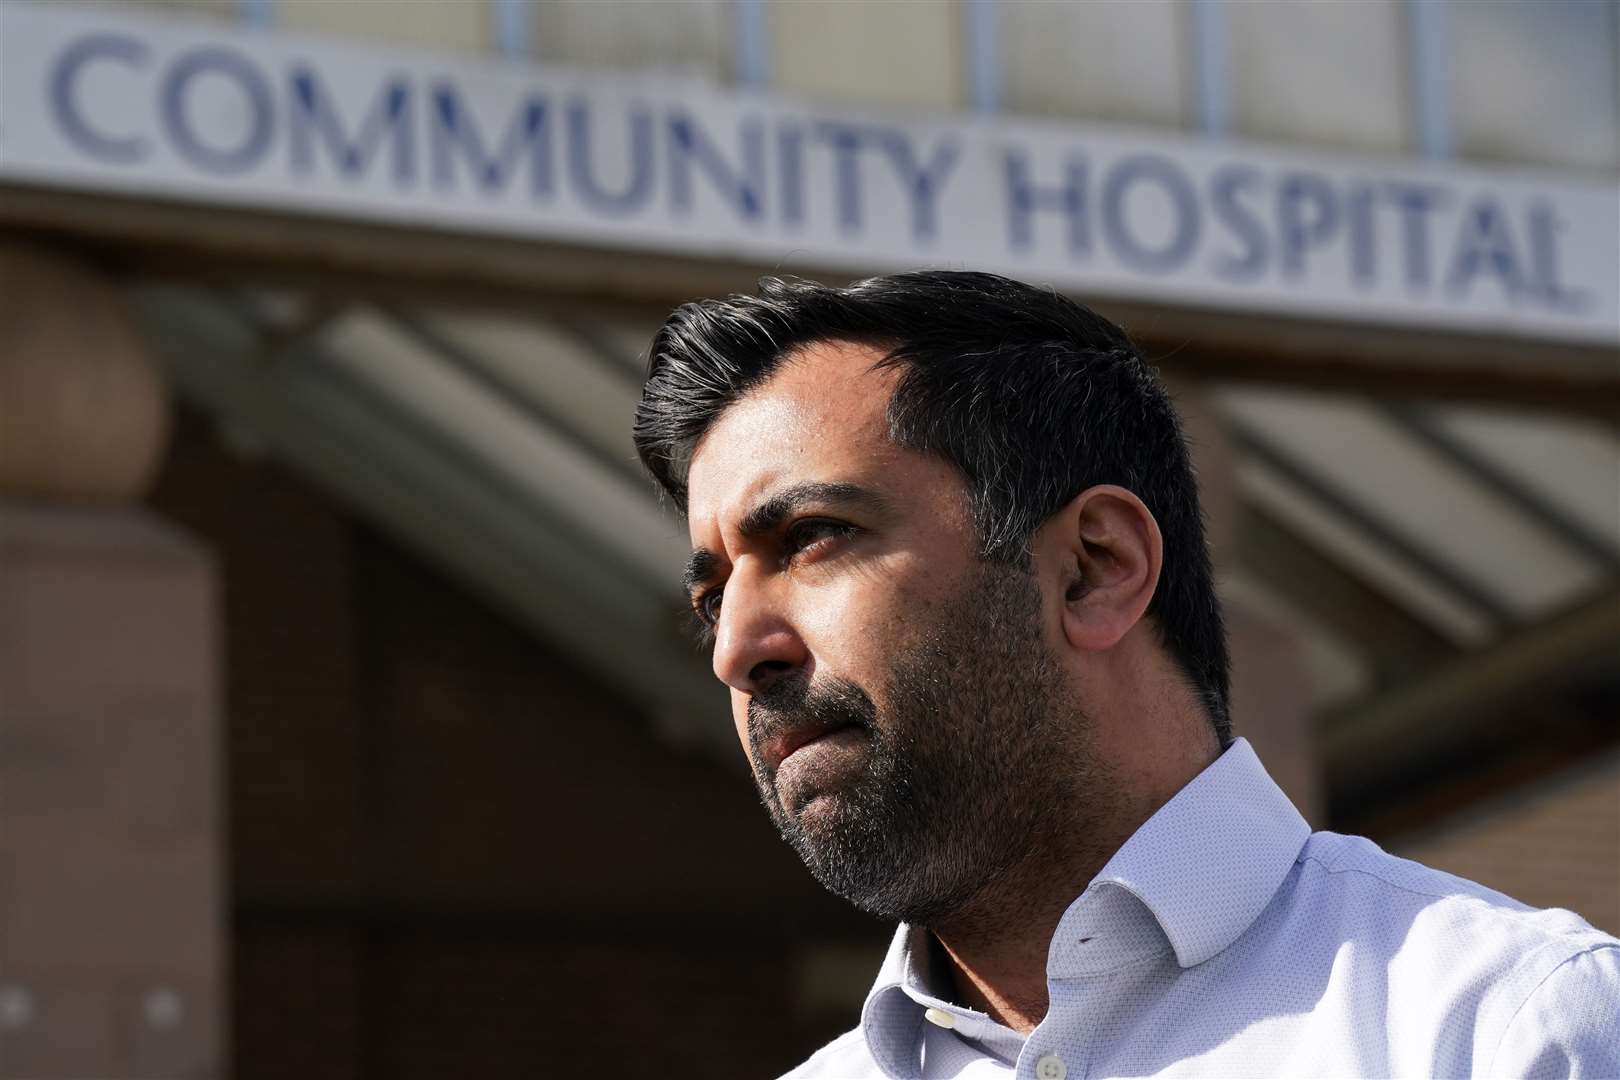 Health Secretary Humza Yousaf said it was the second year in a row NHS staff in Scotland were being offered a record-breaking pay deal (Andrew MIlligan/PA)